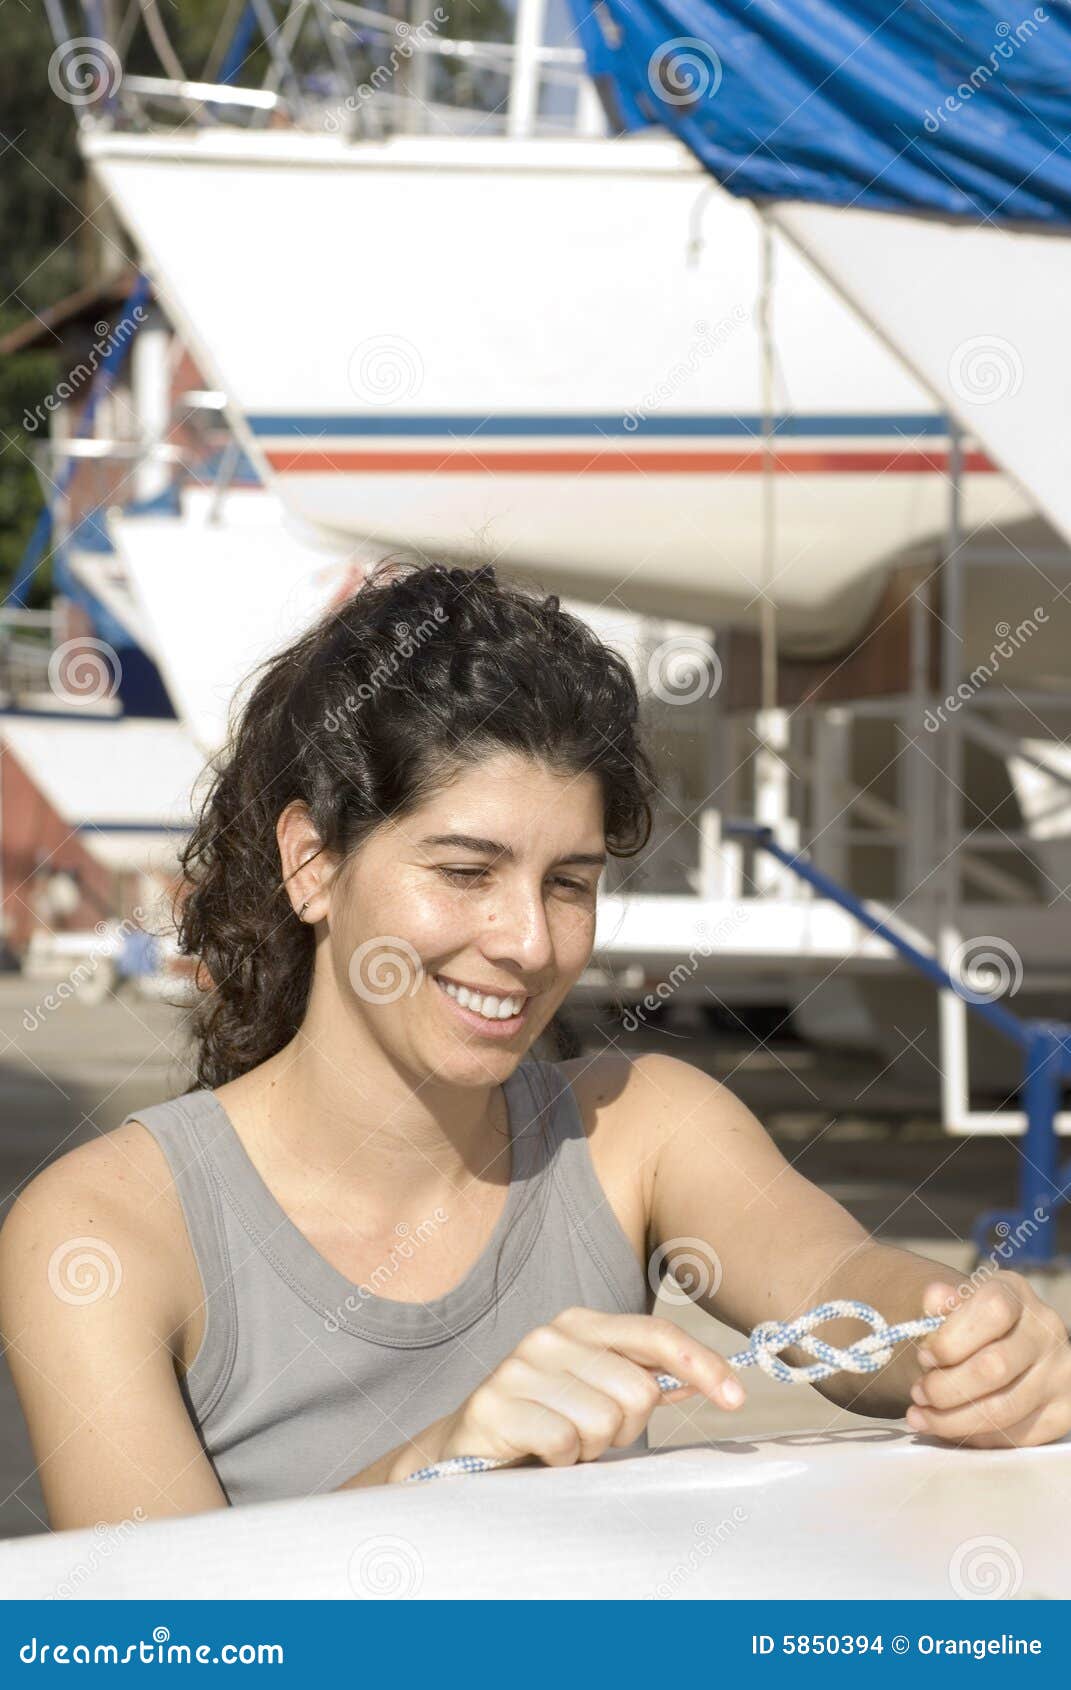 Woman Tying Knot On Sailboat - Vertical Stock Photo ...